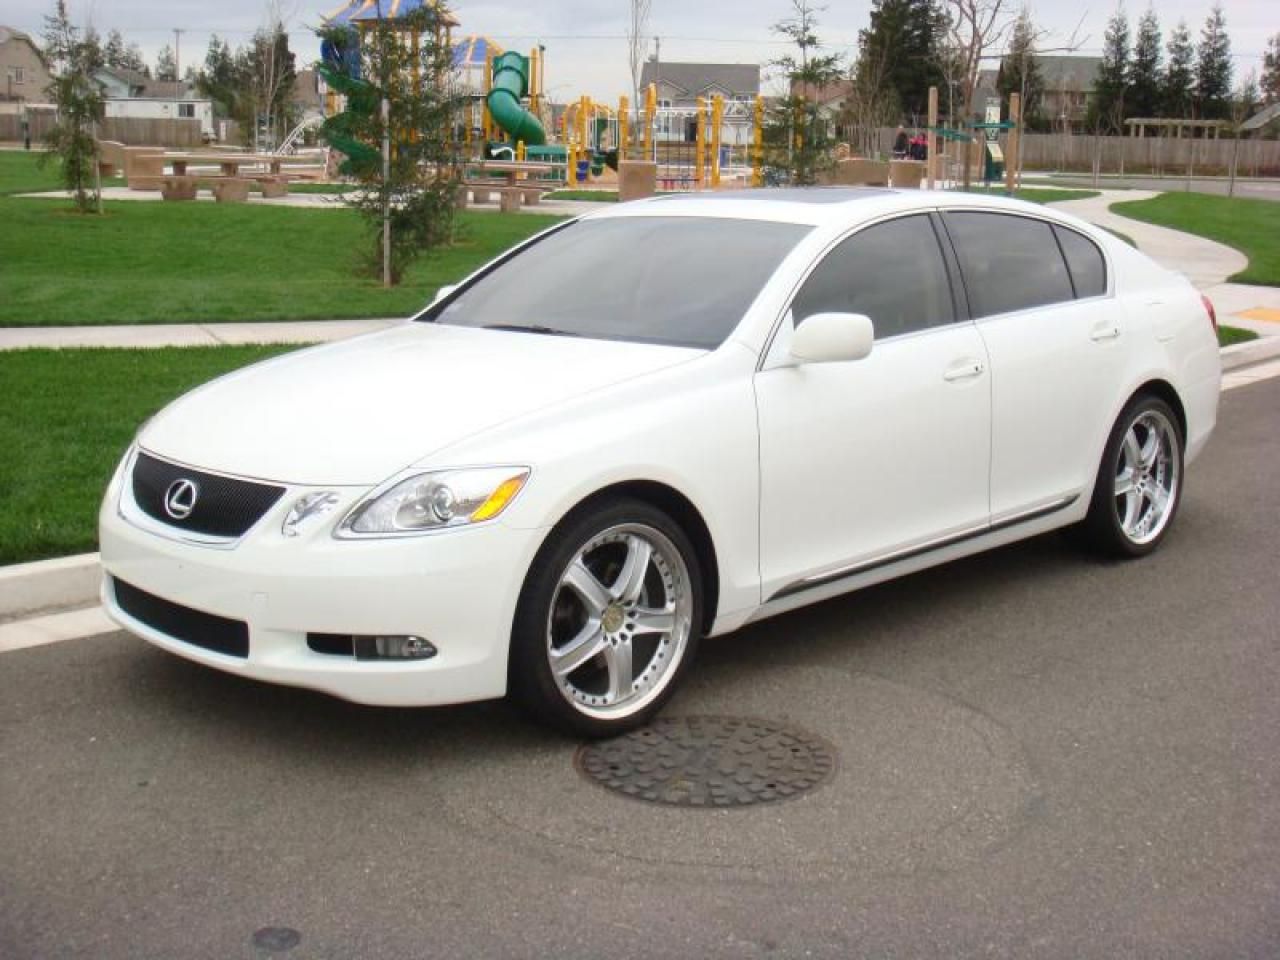 06 Lexus Gs 300 Awd 0 60 Times Top Speed Specs Quarter Mile And Wallpapers Mycarspecs United States Usa